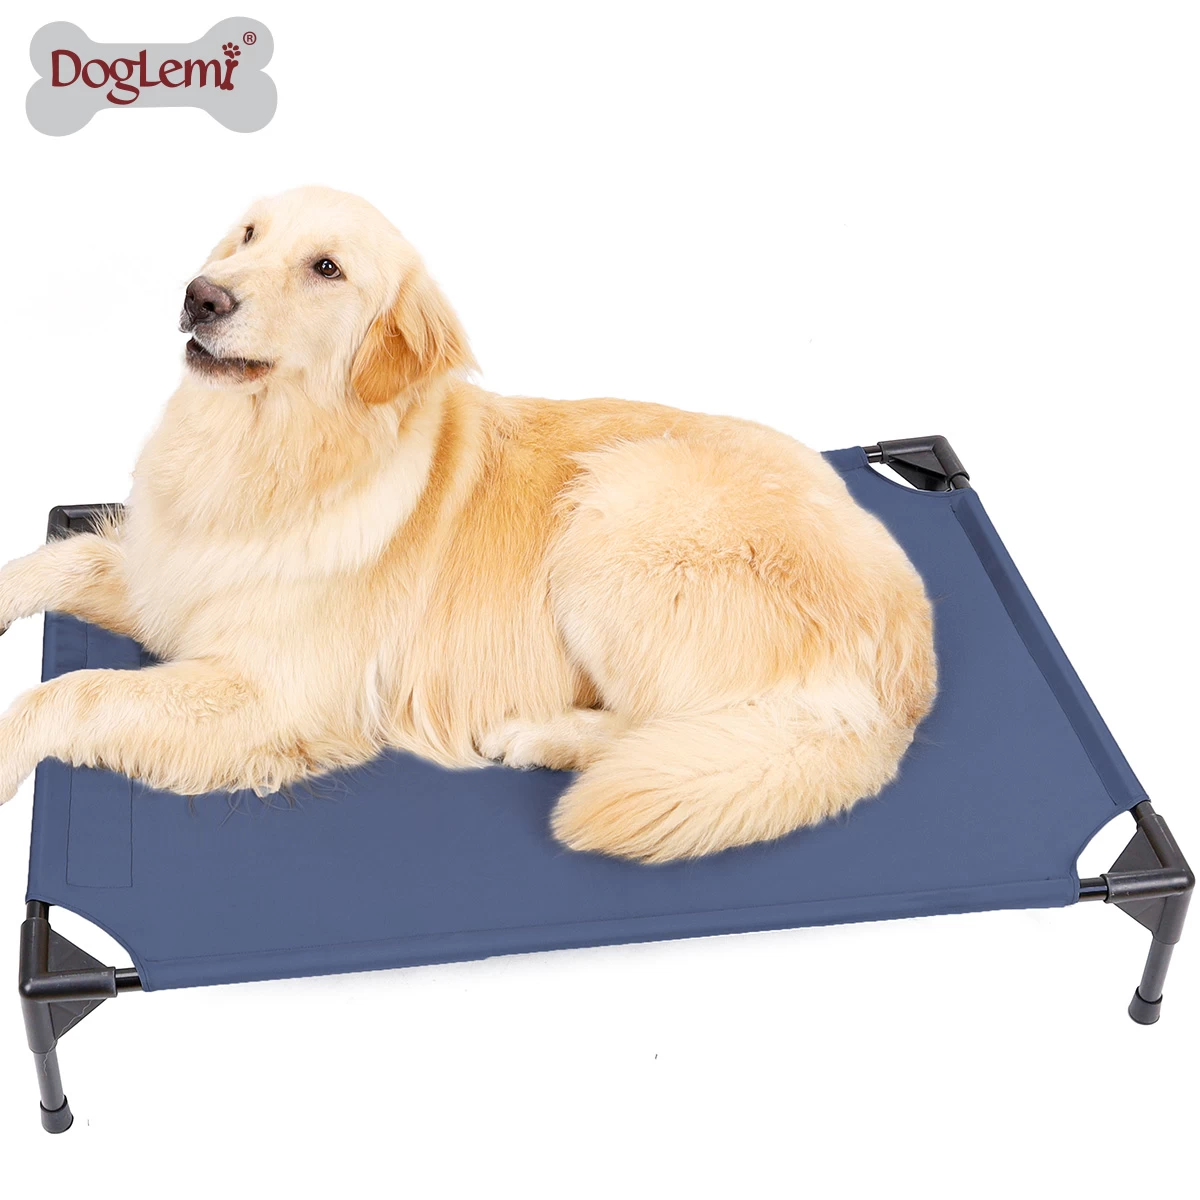 Collapsible pet camp bed